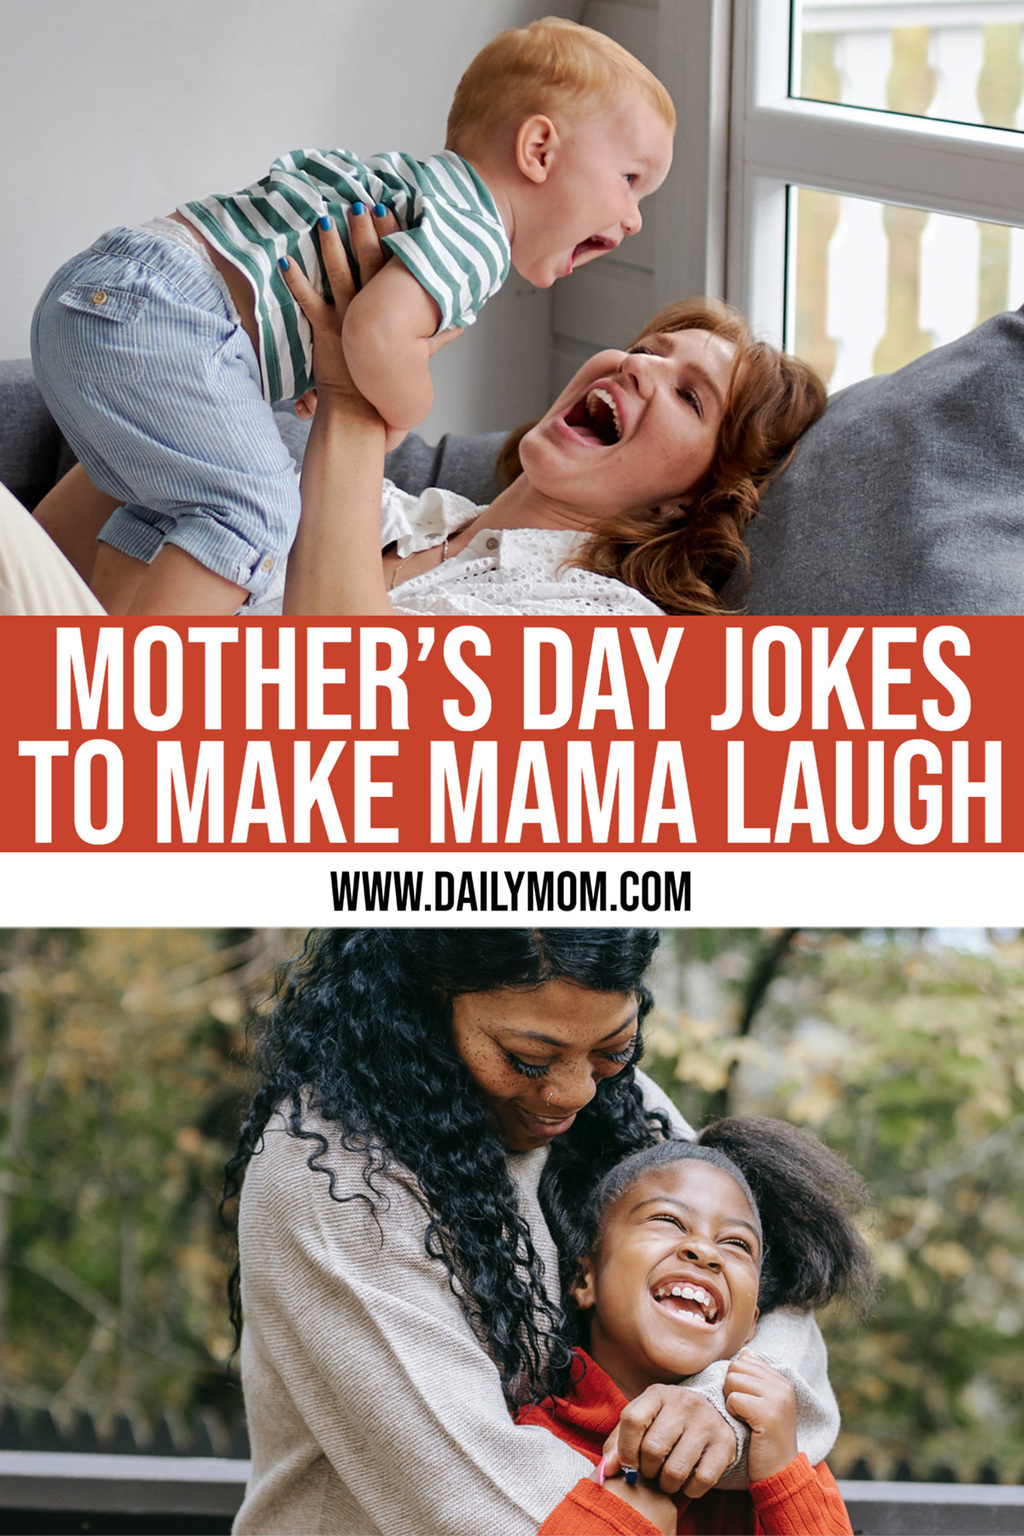 36 Wonderful Mother’s Day Jokes To Make Mama Laugh And Smile